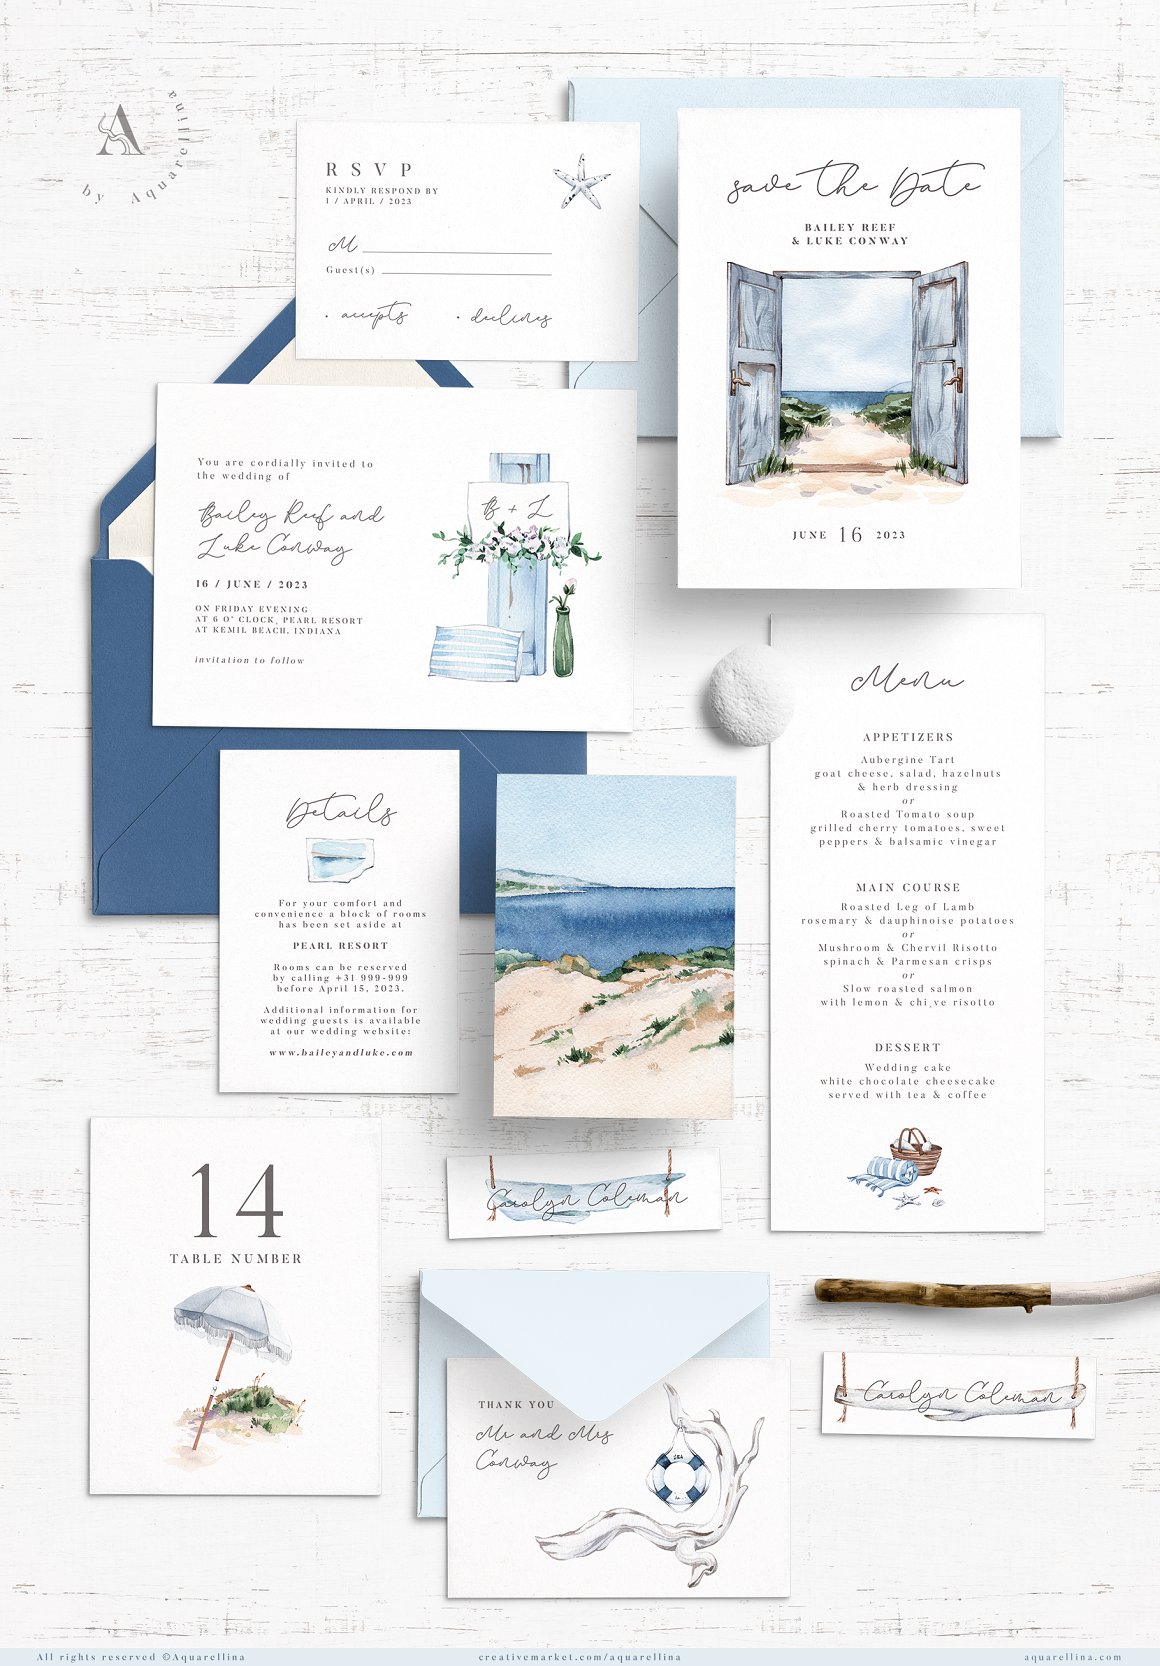 Invitations for a wedding in a marine theme.